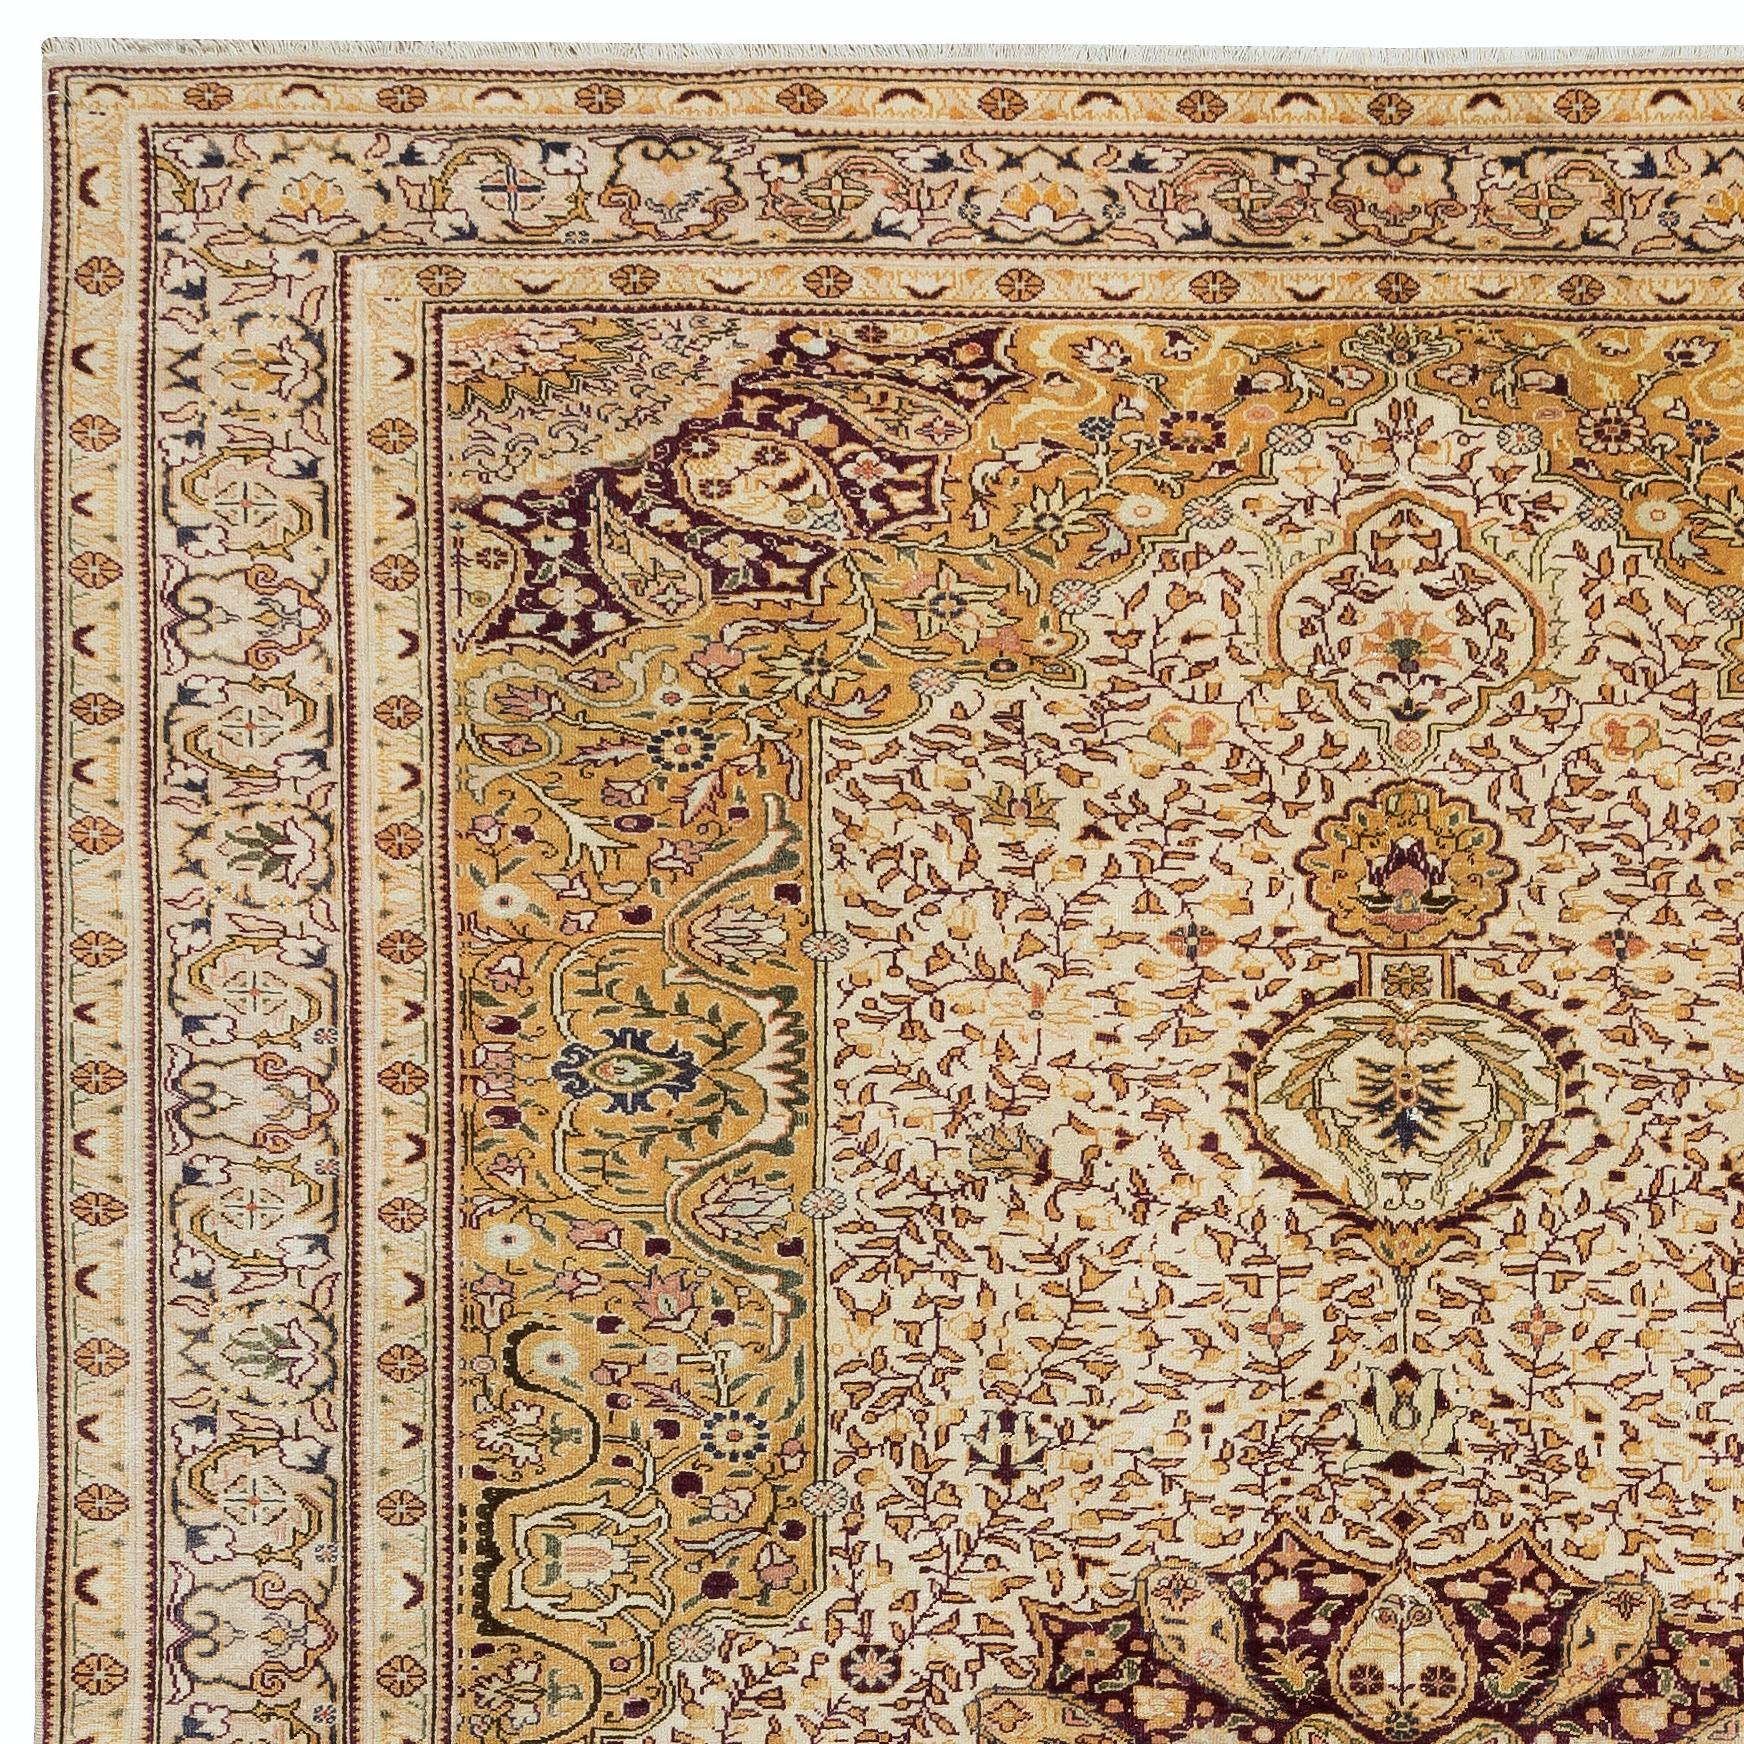 Immerse yourself in the timeless elegance of this vintage Turkish wool area rug, a striking blend of craftsmanship and artistry that brings the allure of Anatolian heritage into your living space. Handwoven with meticulous care, this rug is a